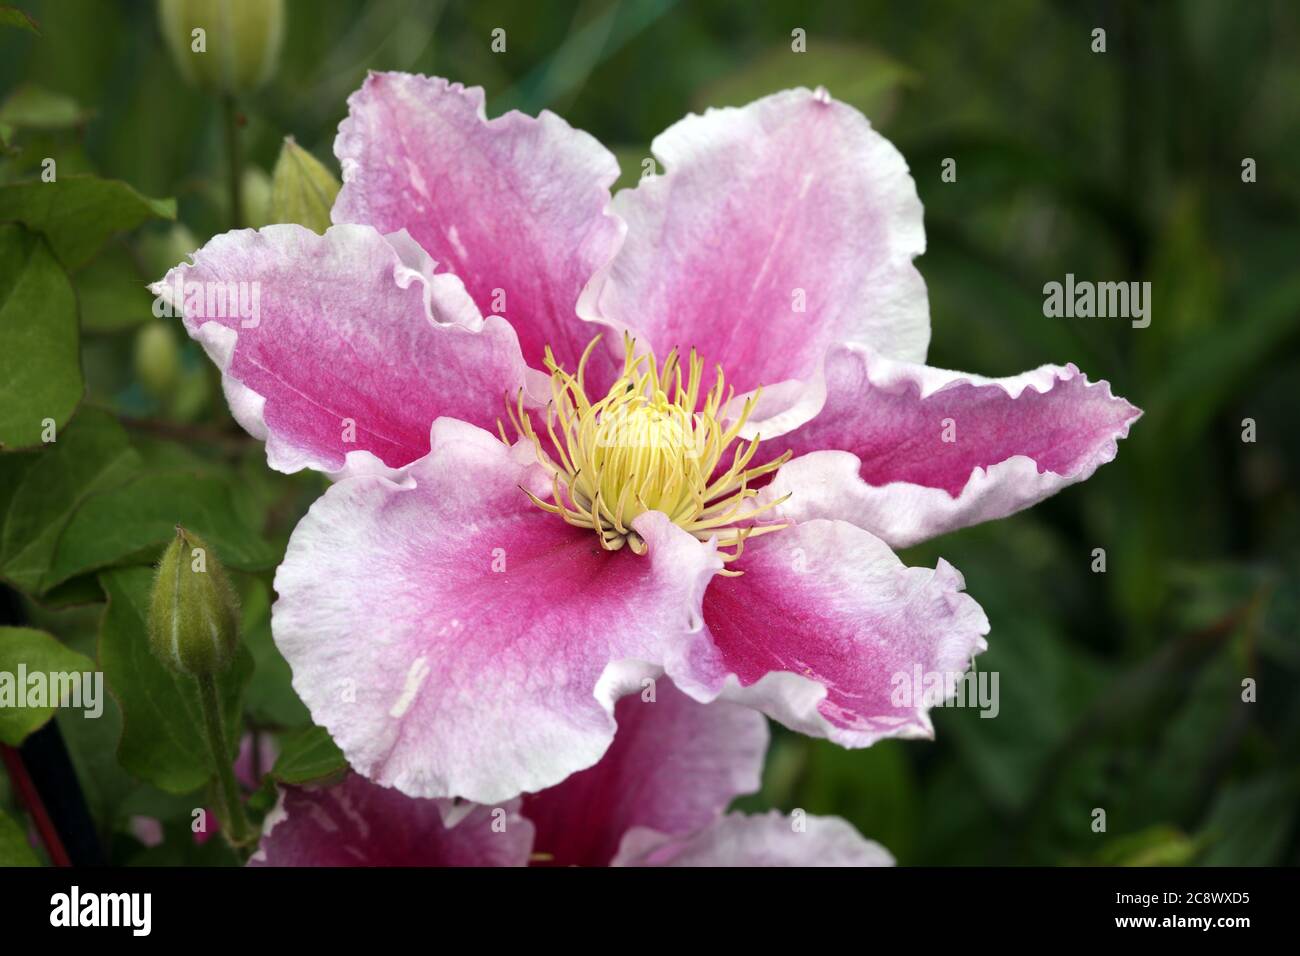 Clematis 'Piilu' a pink hybrid cultivated herbaceous perennial garden flower climbing shrub stock photo Stock Photo